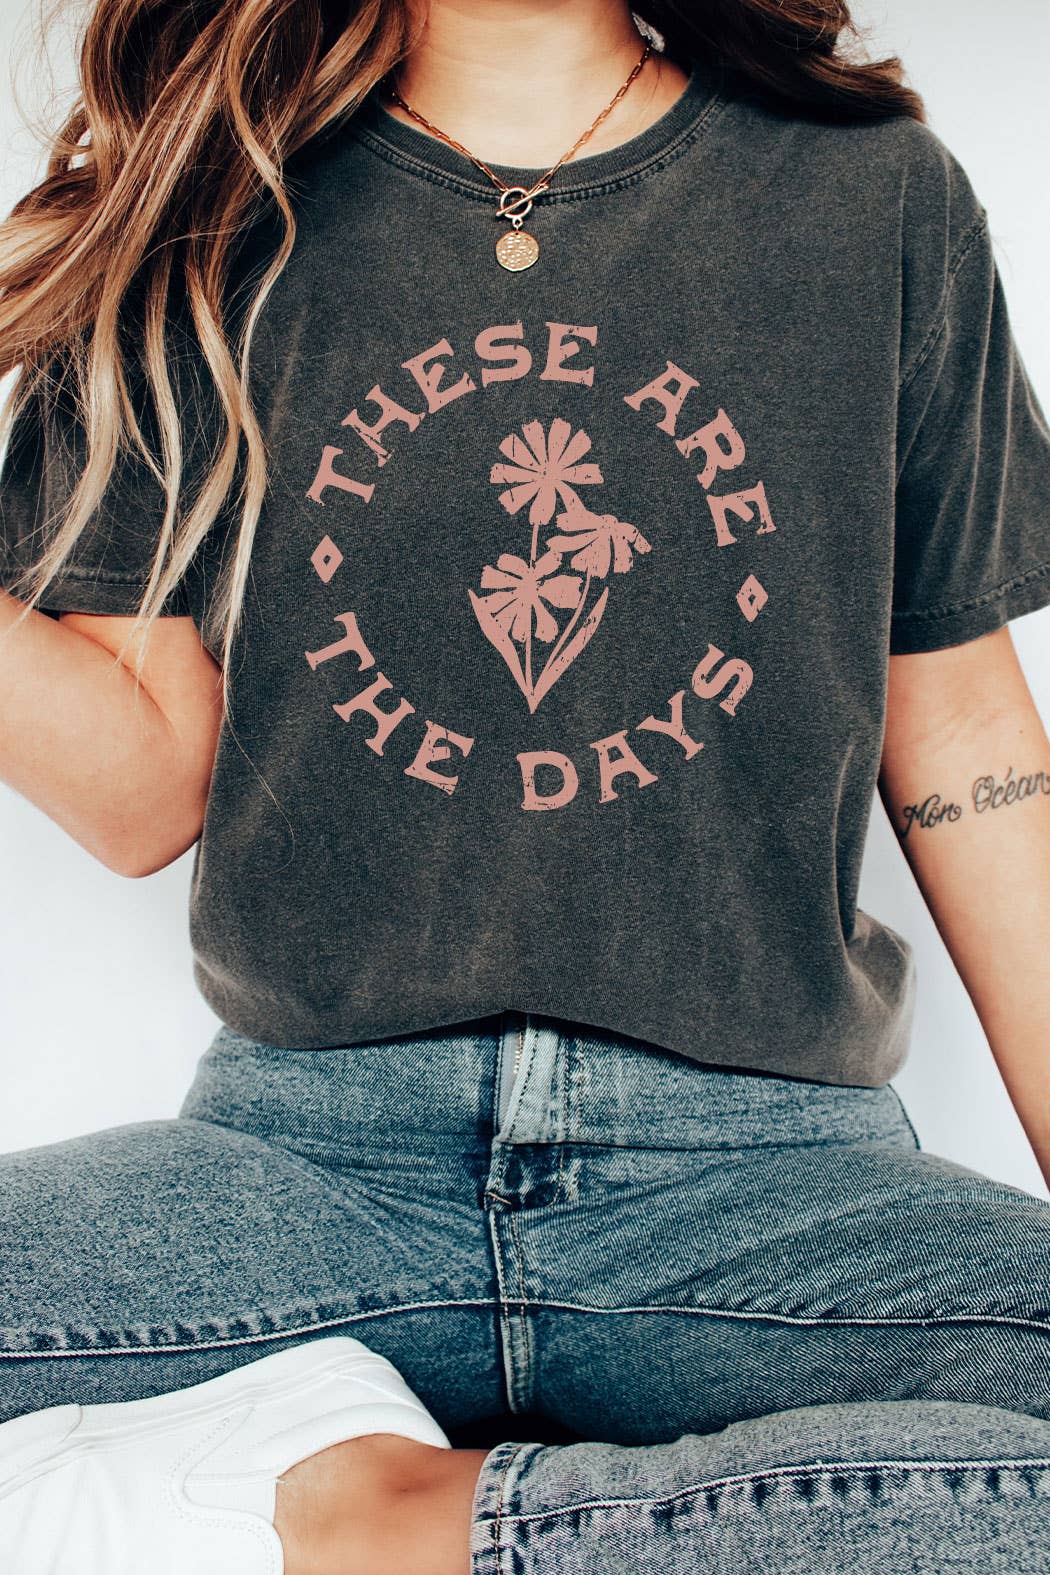 These are the Days Tee